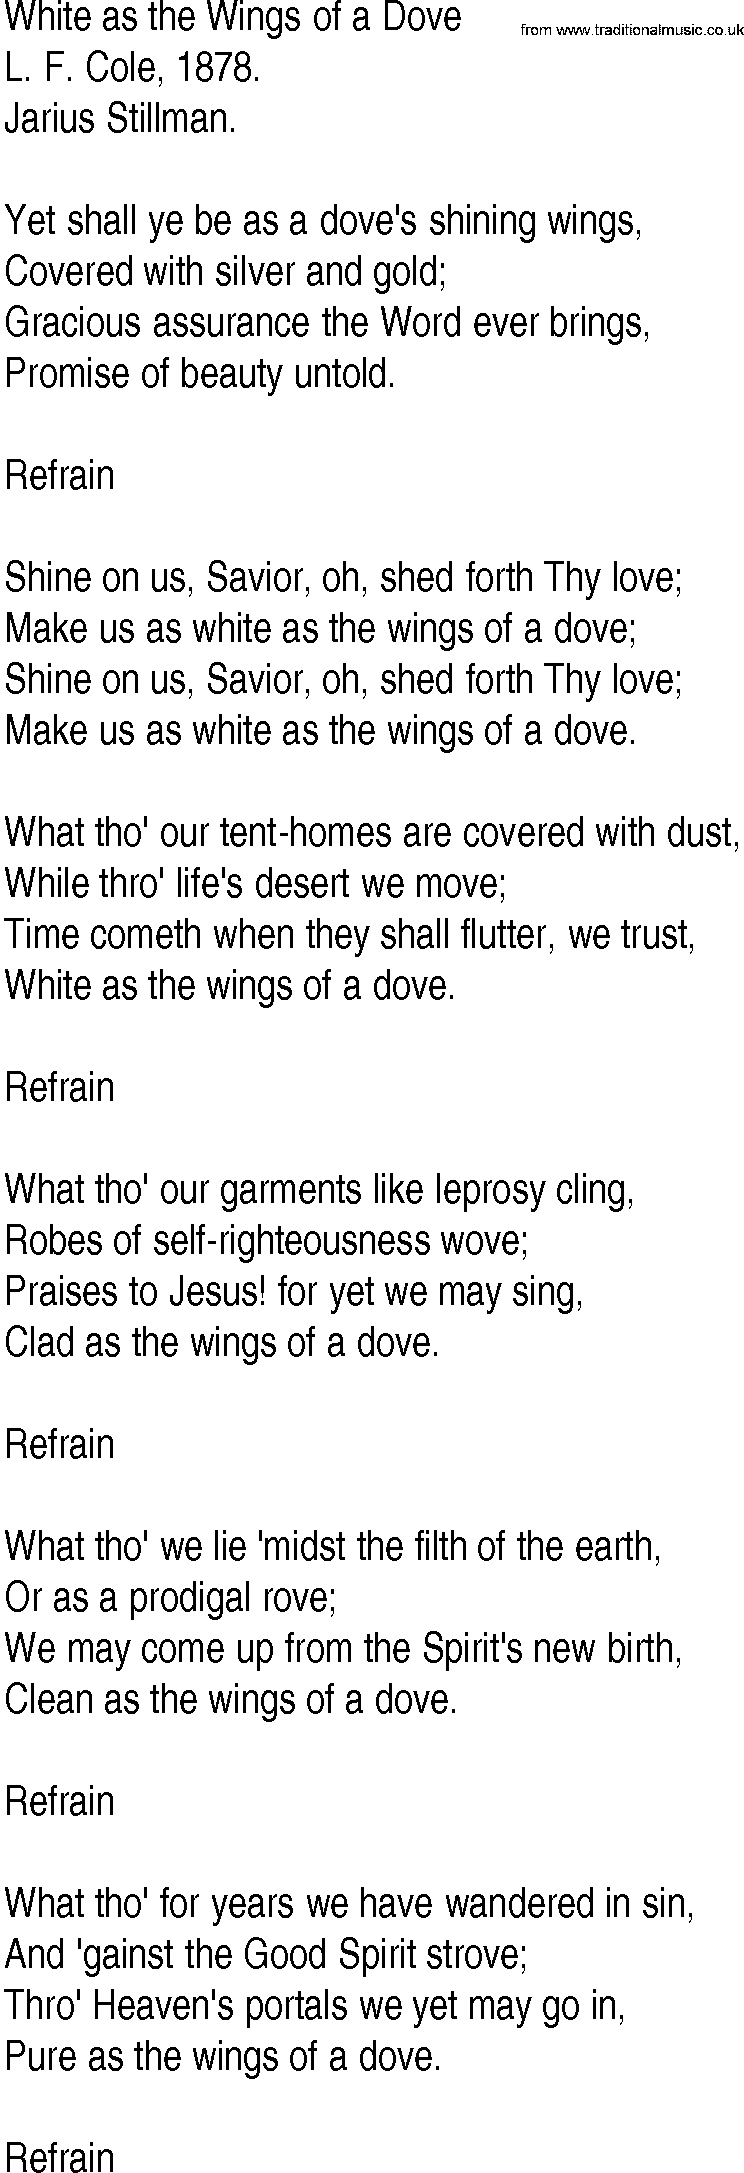 Hymn and Gospel Song: White as the Wings of a Dove by L F Cole lyrics